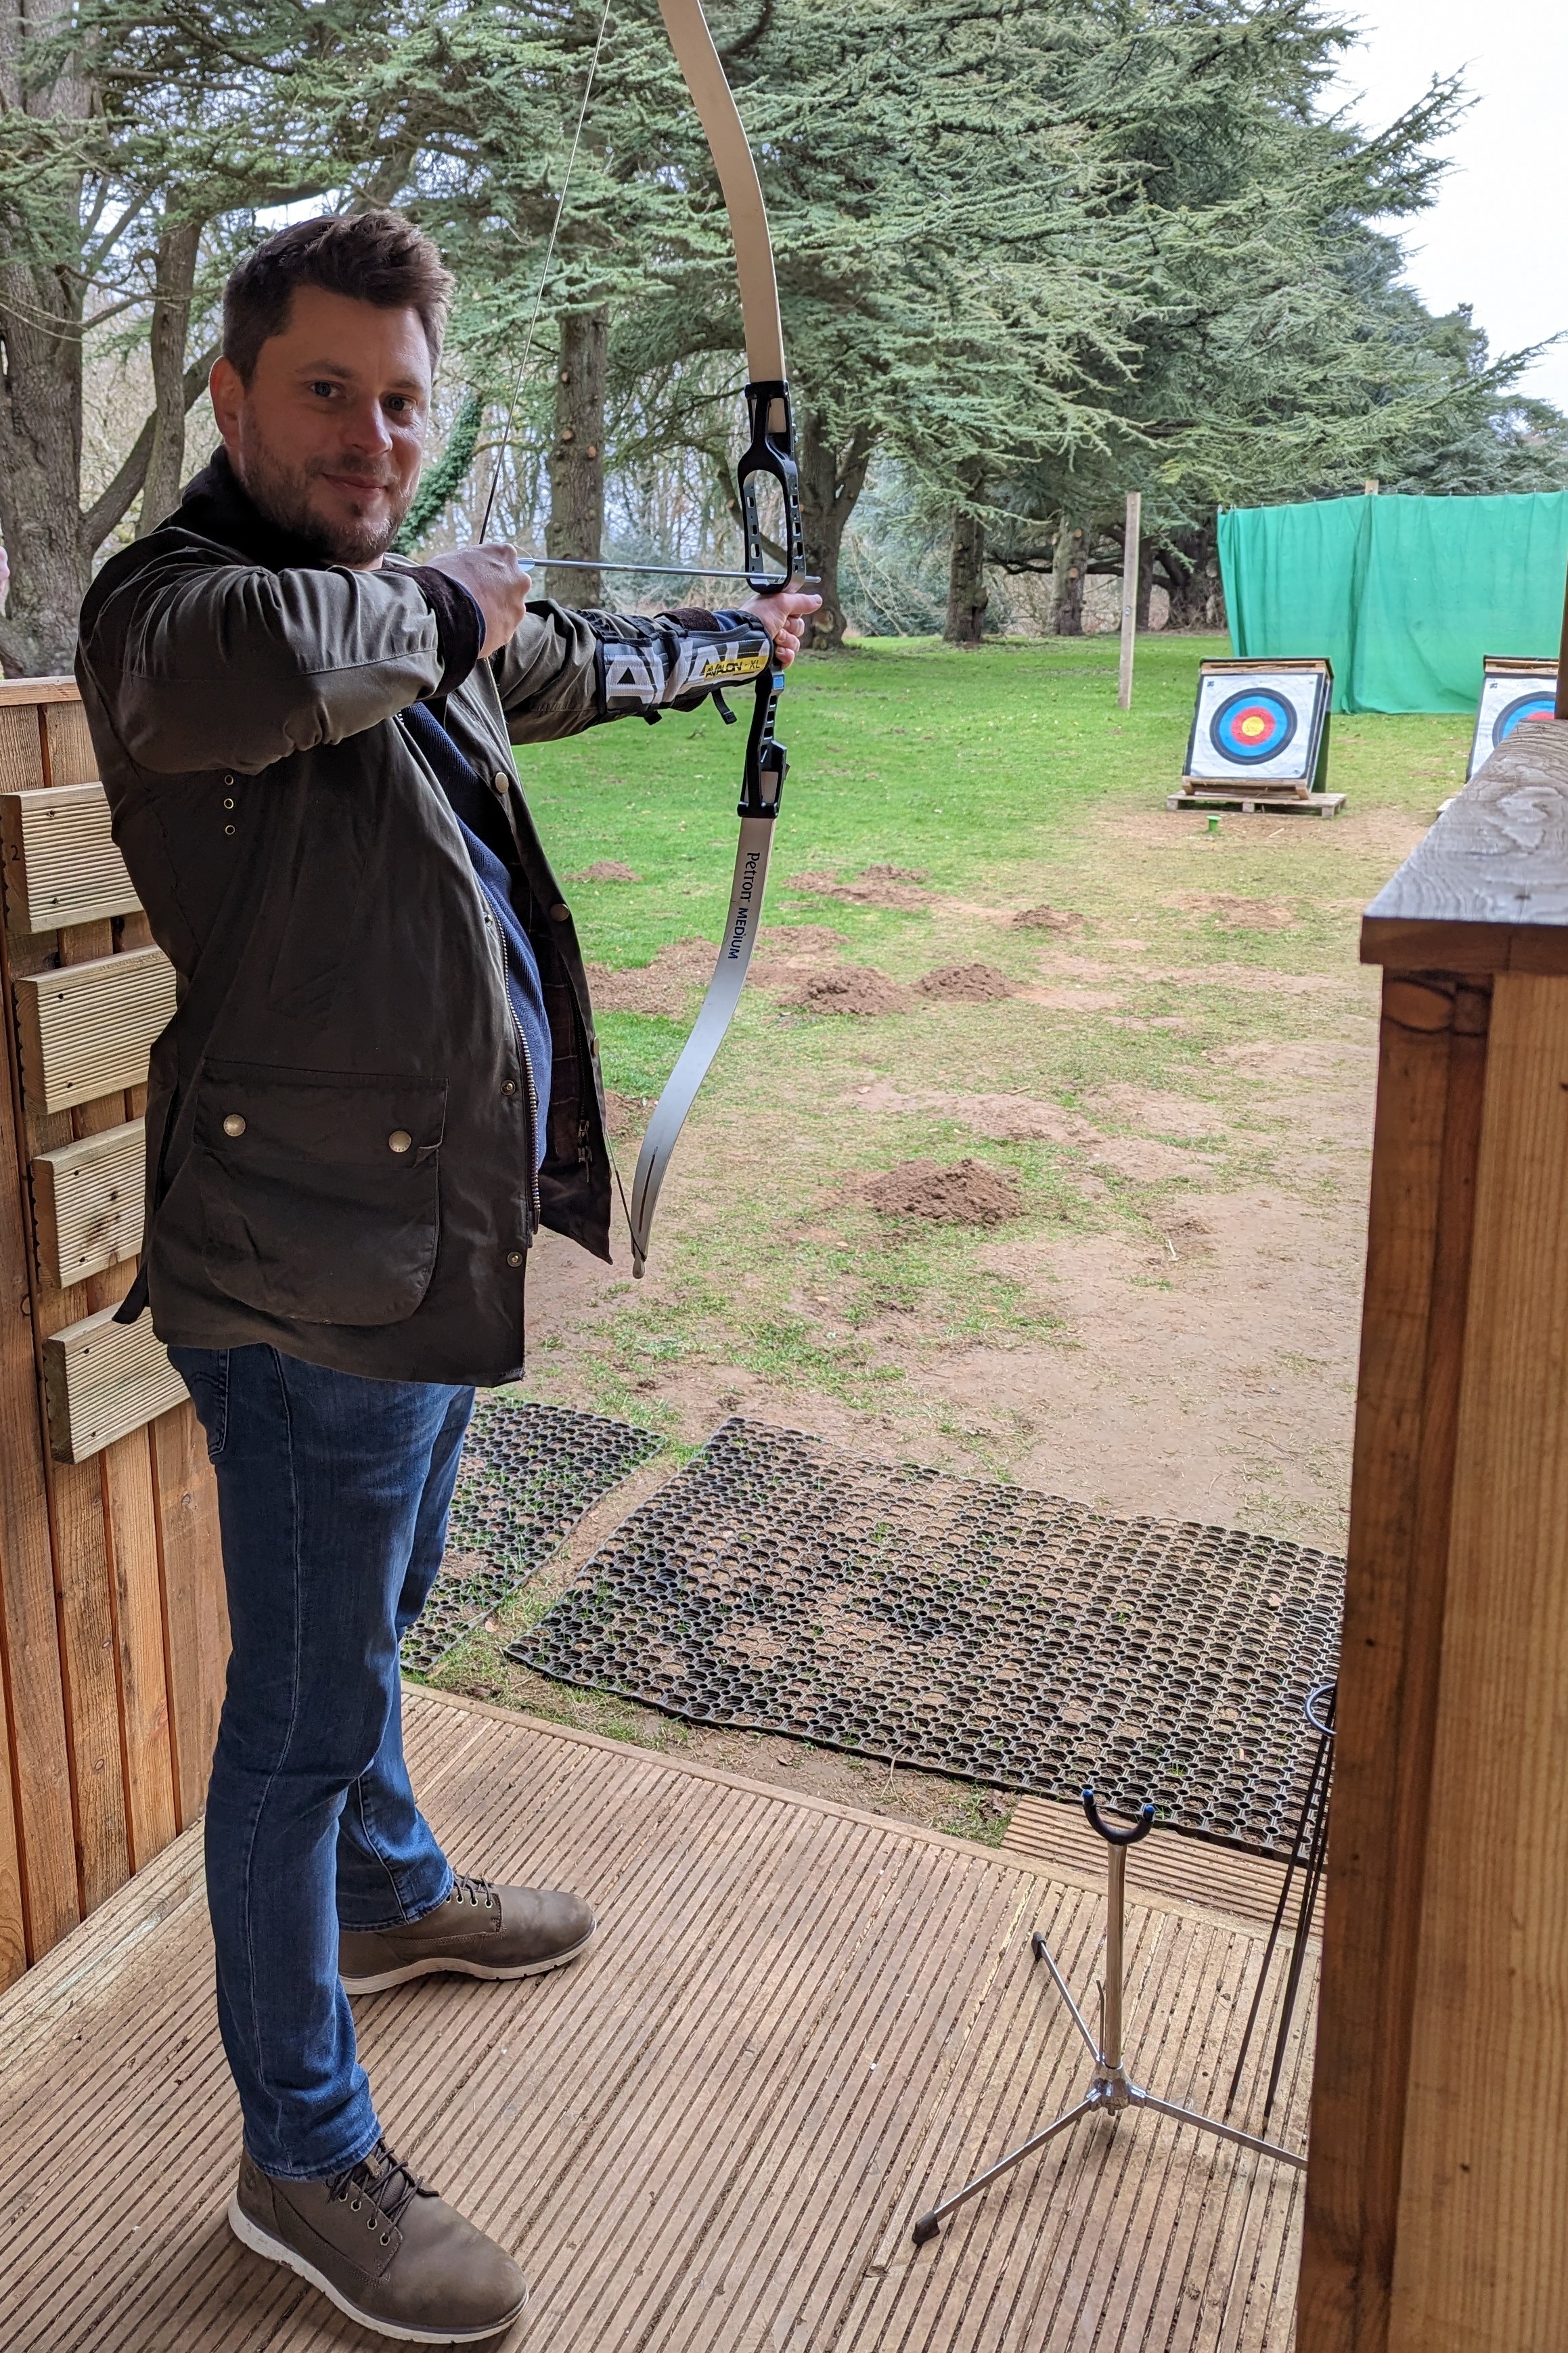 Reporter Ed Elliot had mixed results at the archery range